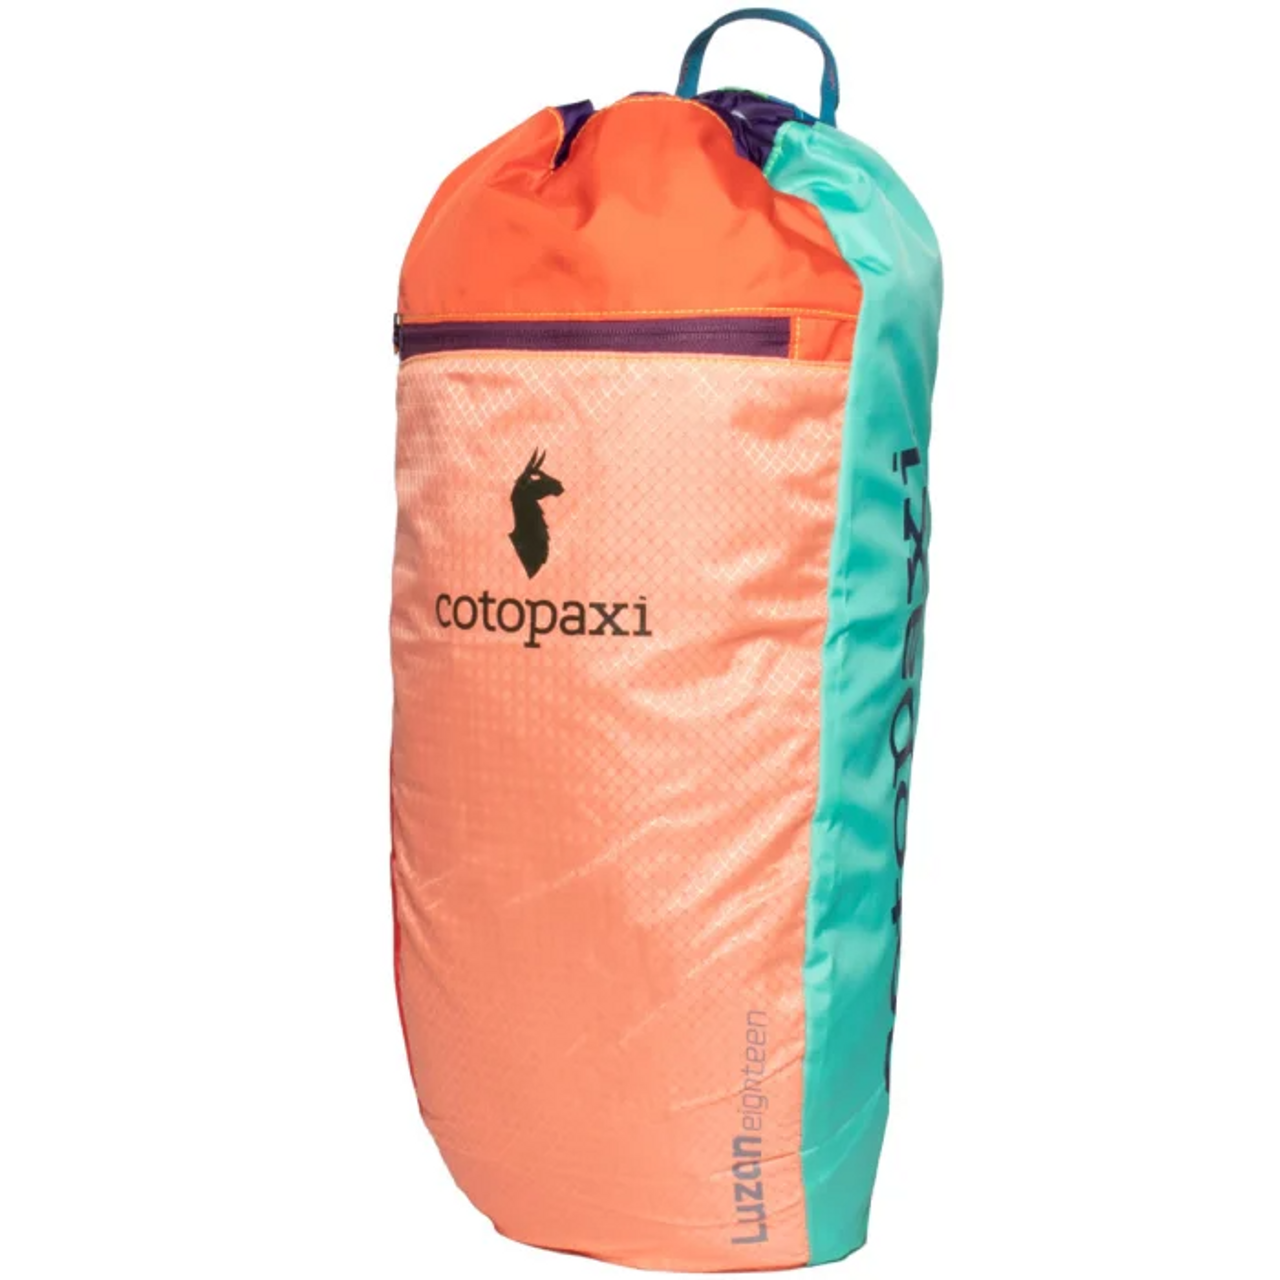 New stock shipments from Vuori, Cotopaxi, and Patagonia have